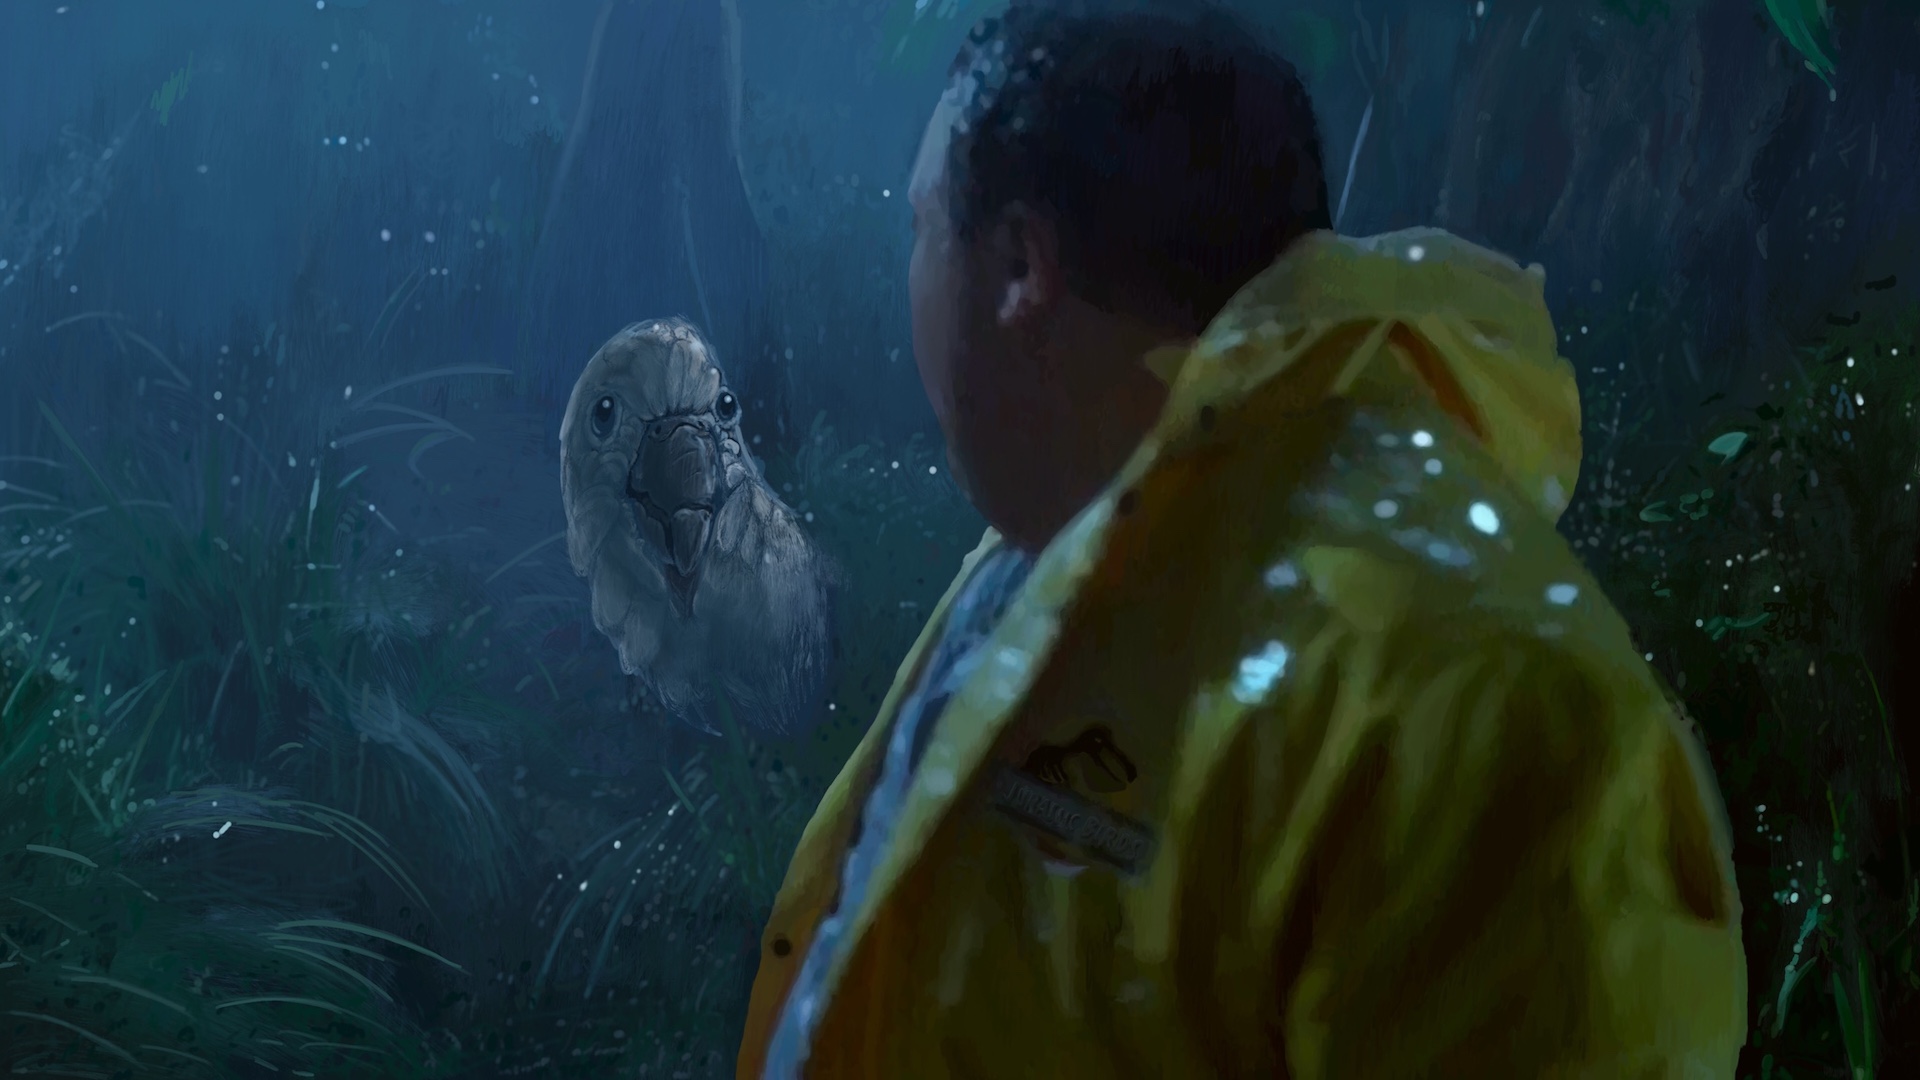 Digitally painted reproduction of of a frame from Jurassic Park, but instead of a dilophosaurus peeking out of the bushes, it's a giant cockatoo.'